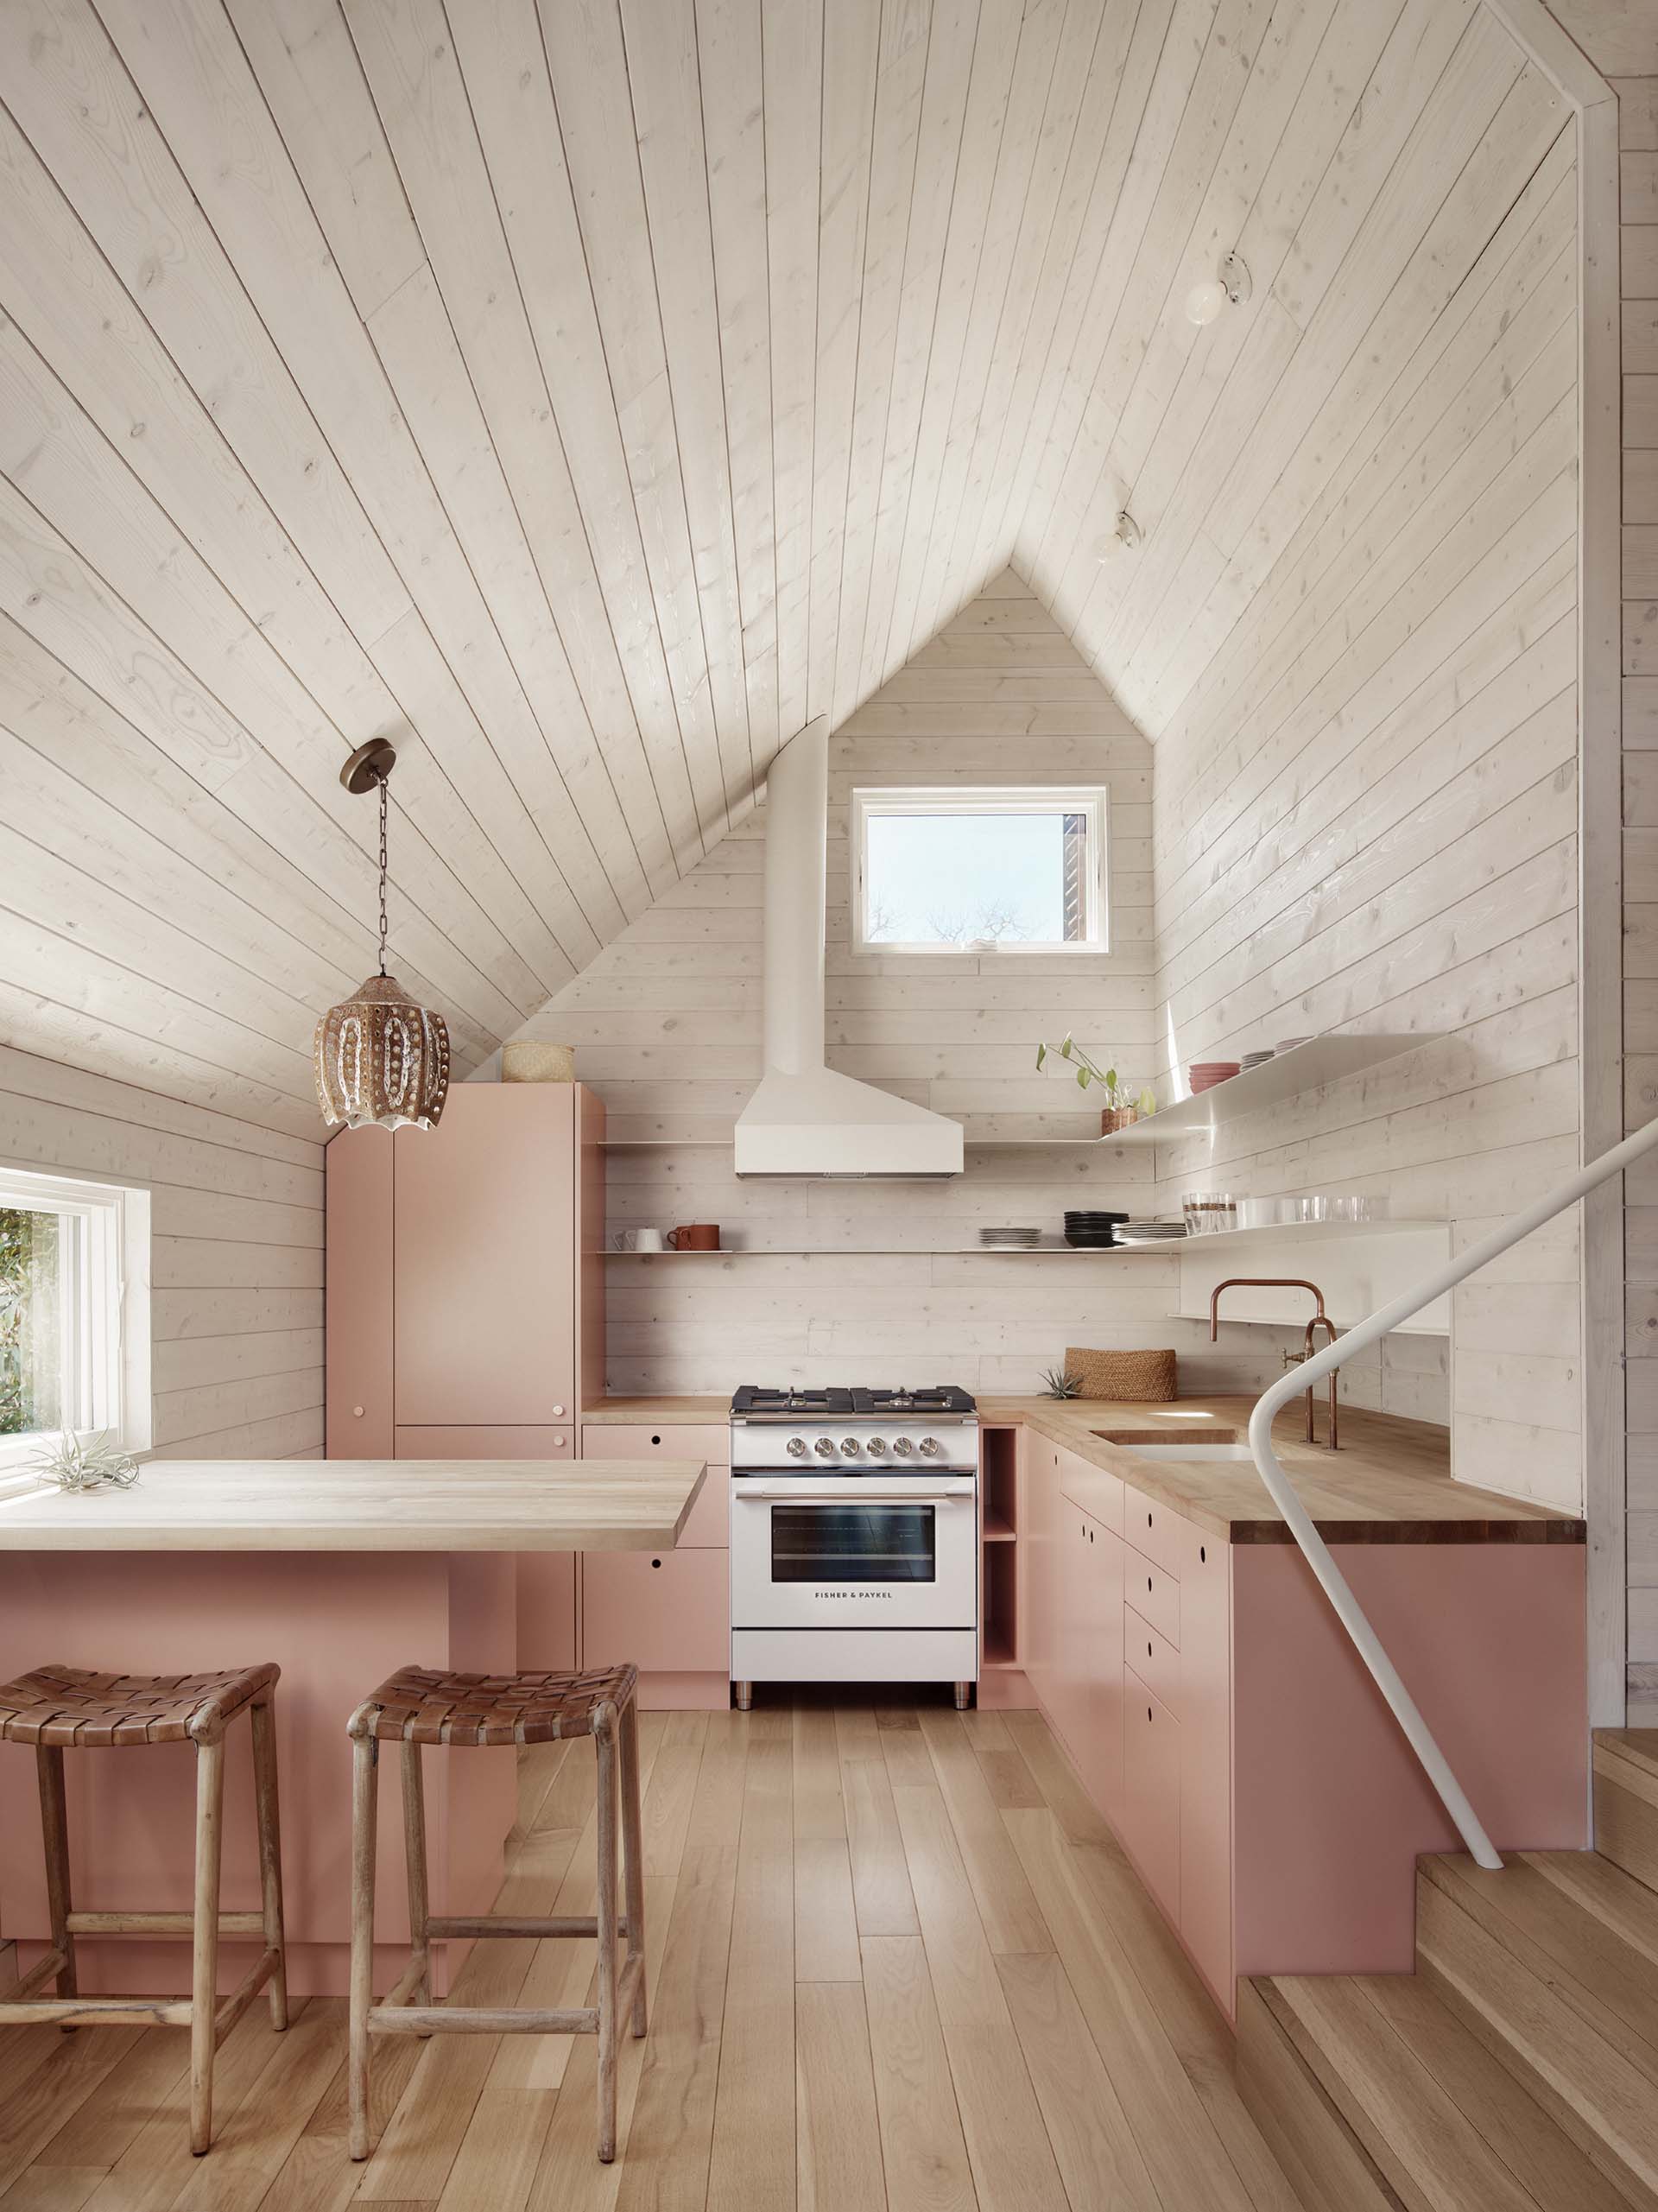 This kitchen features pastel pink cabinets from Ikea have custom-painted fronts, and are topped with off-the-shelf Boos butcher block countertops.